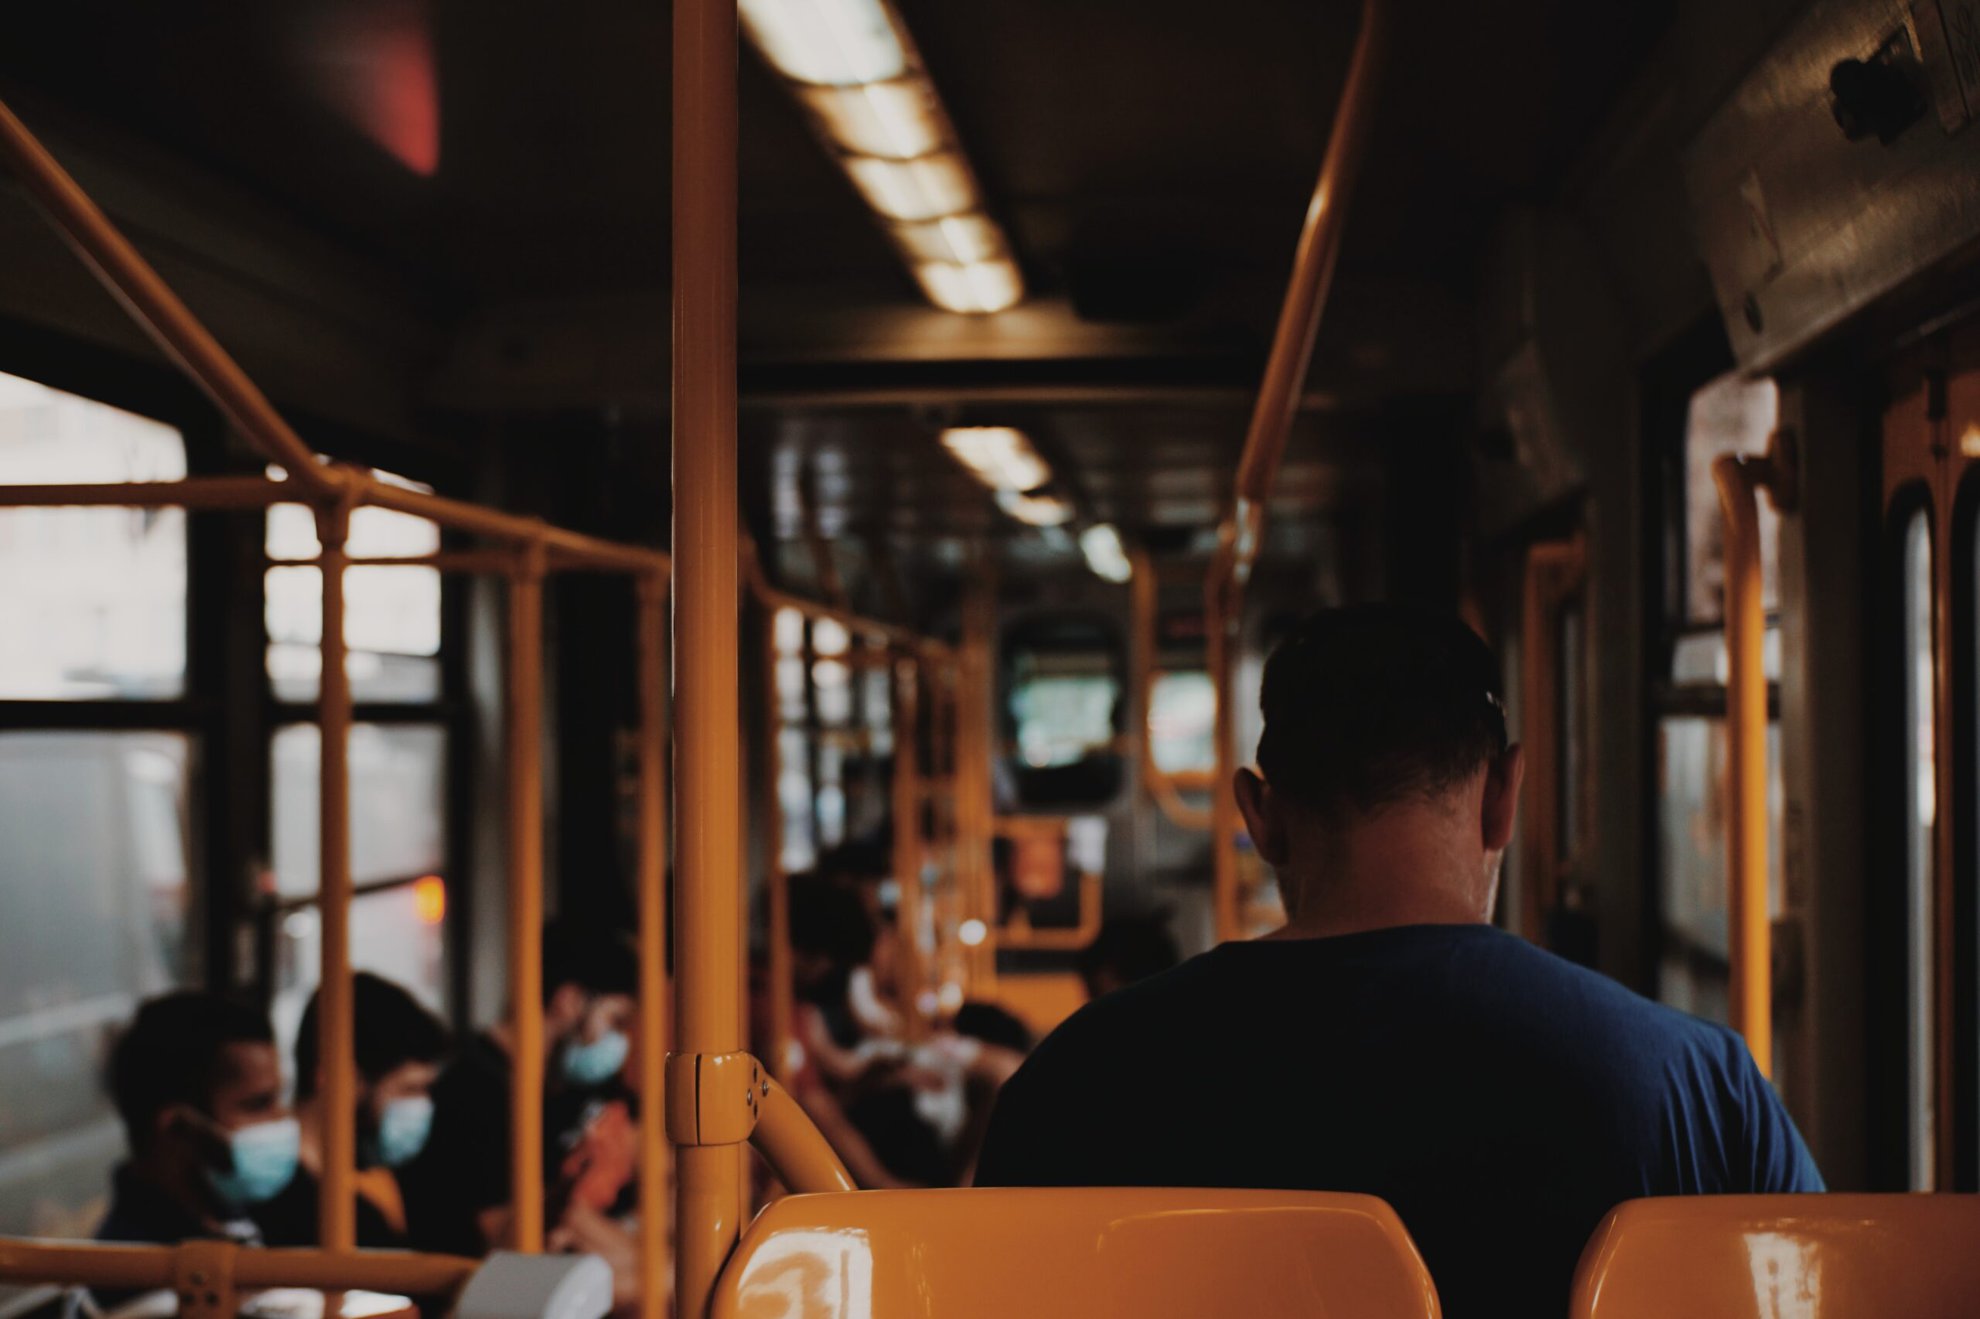 Increasing demand for public transportation can  transform cities and encourage planners to prioritize developing more public spaces. (Credit: David Salamanca via Unsplash)